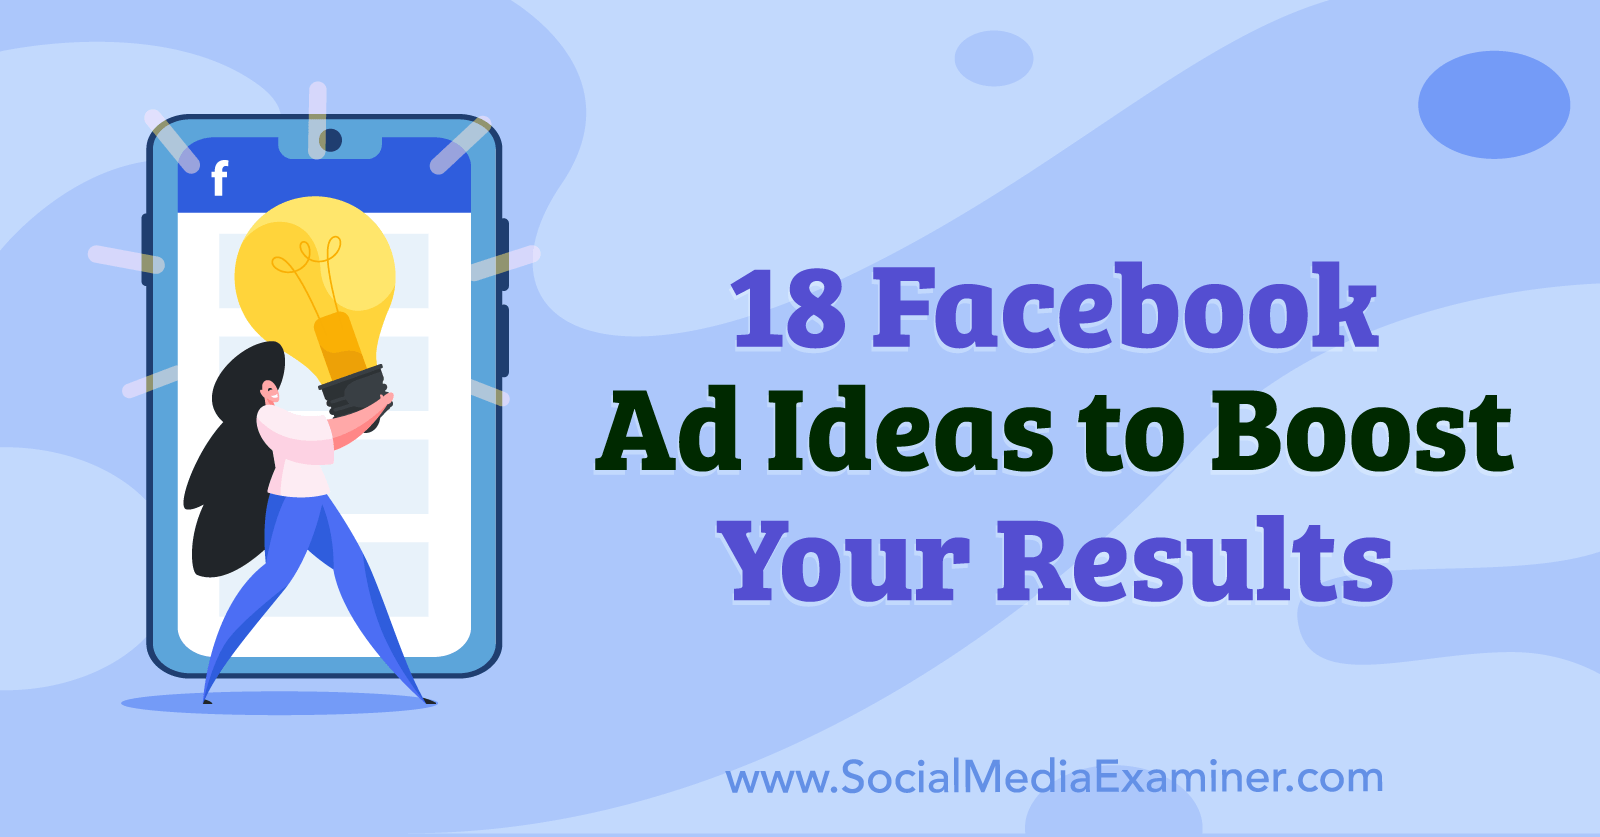 18 Facebook Ad Ideas to Boost Your Results by Anna Sonnenberg on Social Media Examiner.